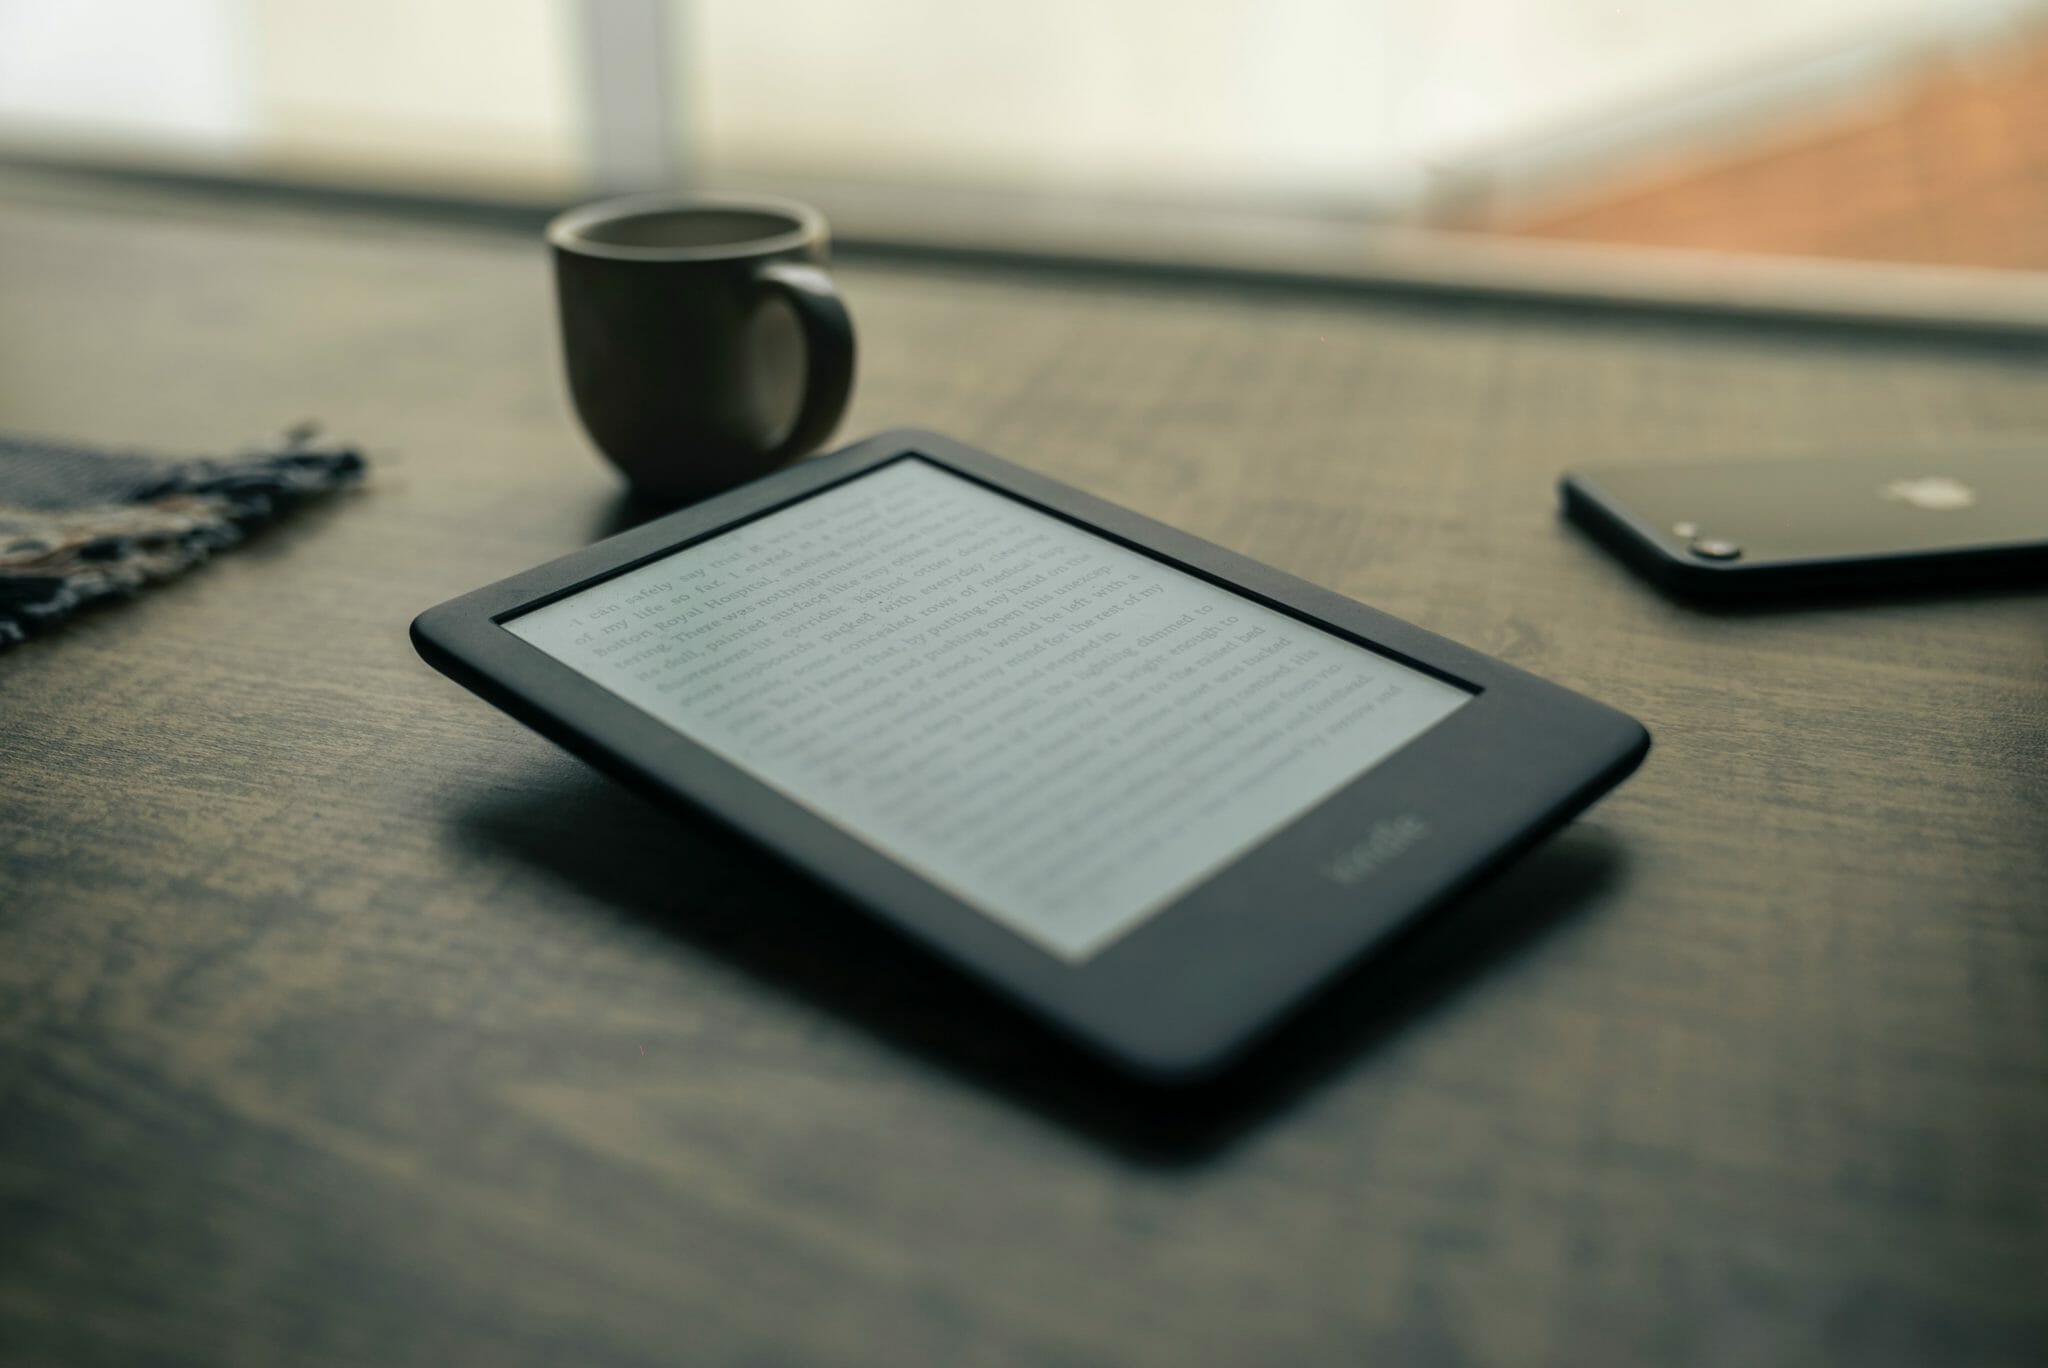 Ebook Formatting: 4 Important Tips for Getting It Right